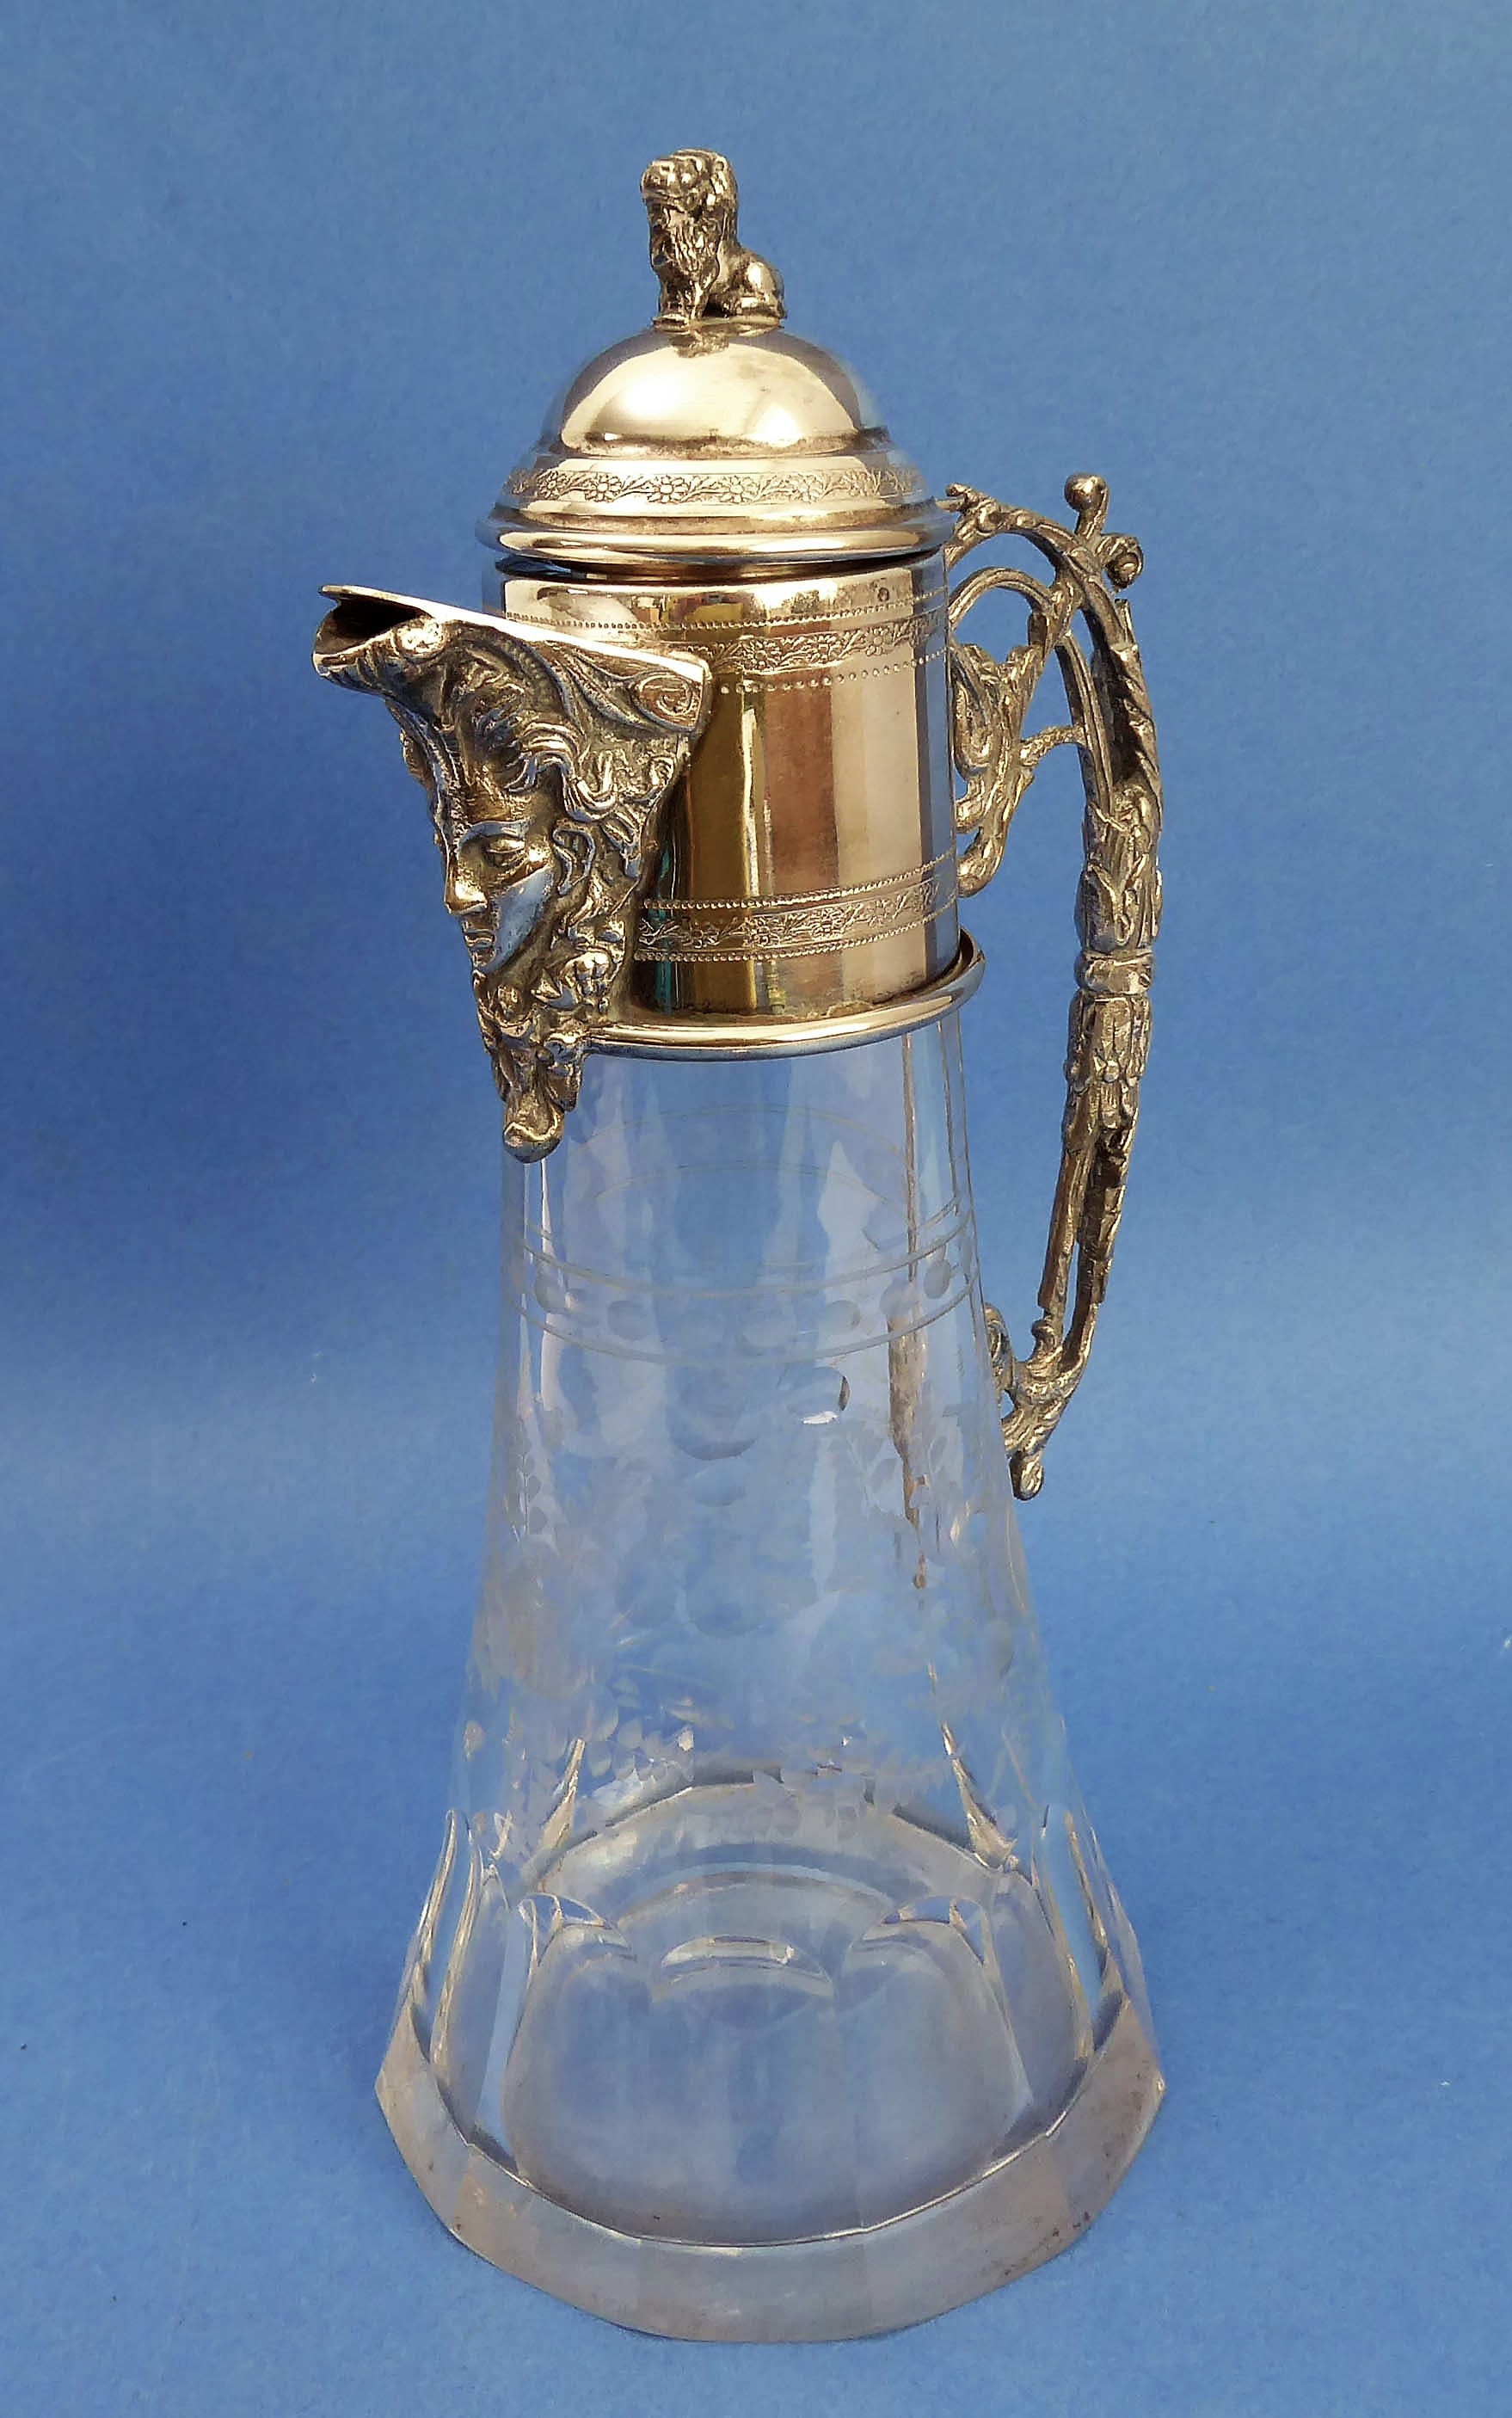 An ornate late 19th century claret jug with silver-plated mounts